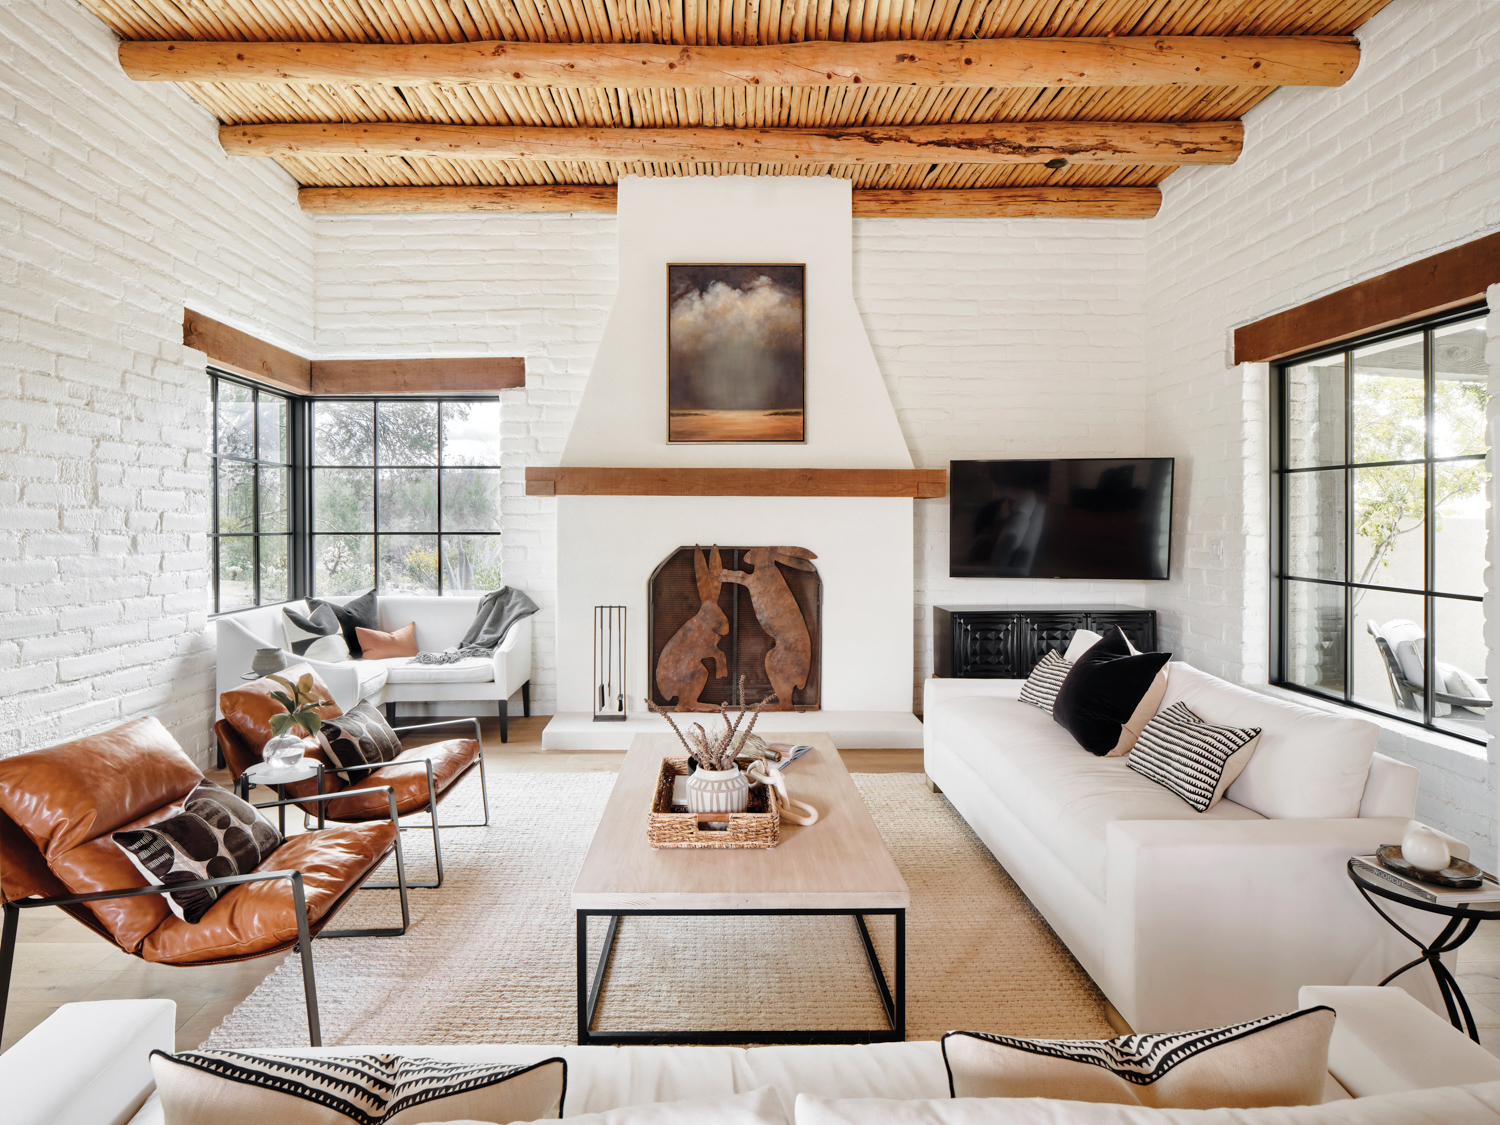 Traditional Adobe Meets A Modern Black-And-White Palette In Arizona